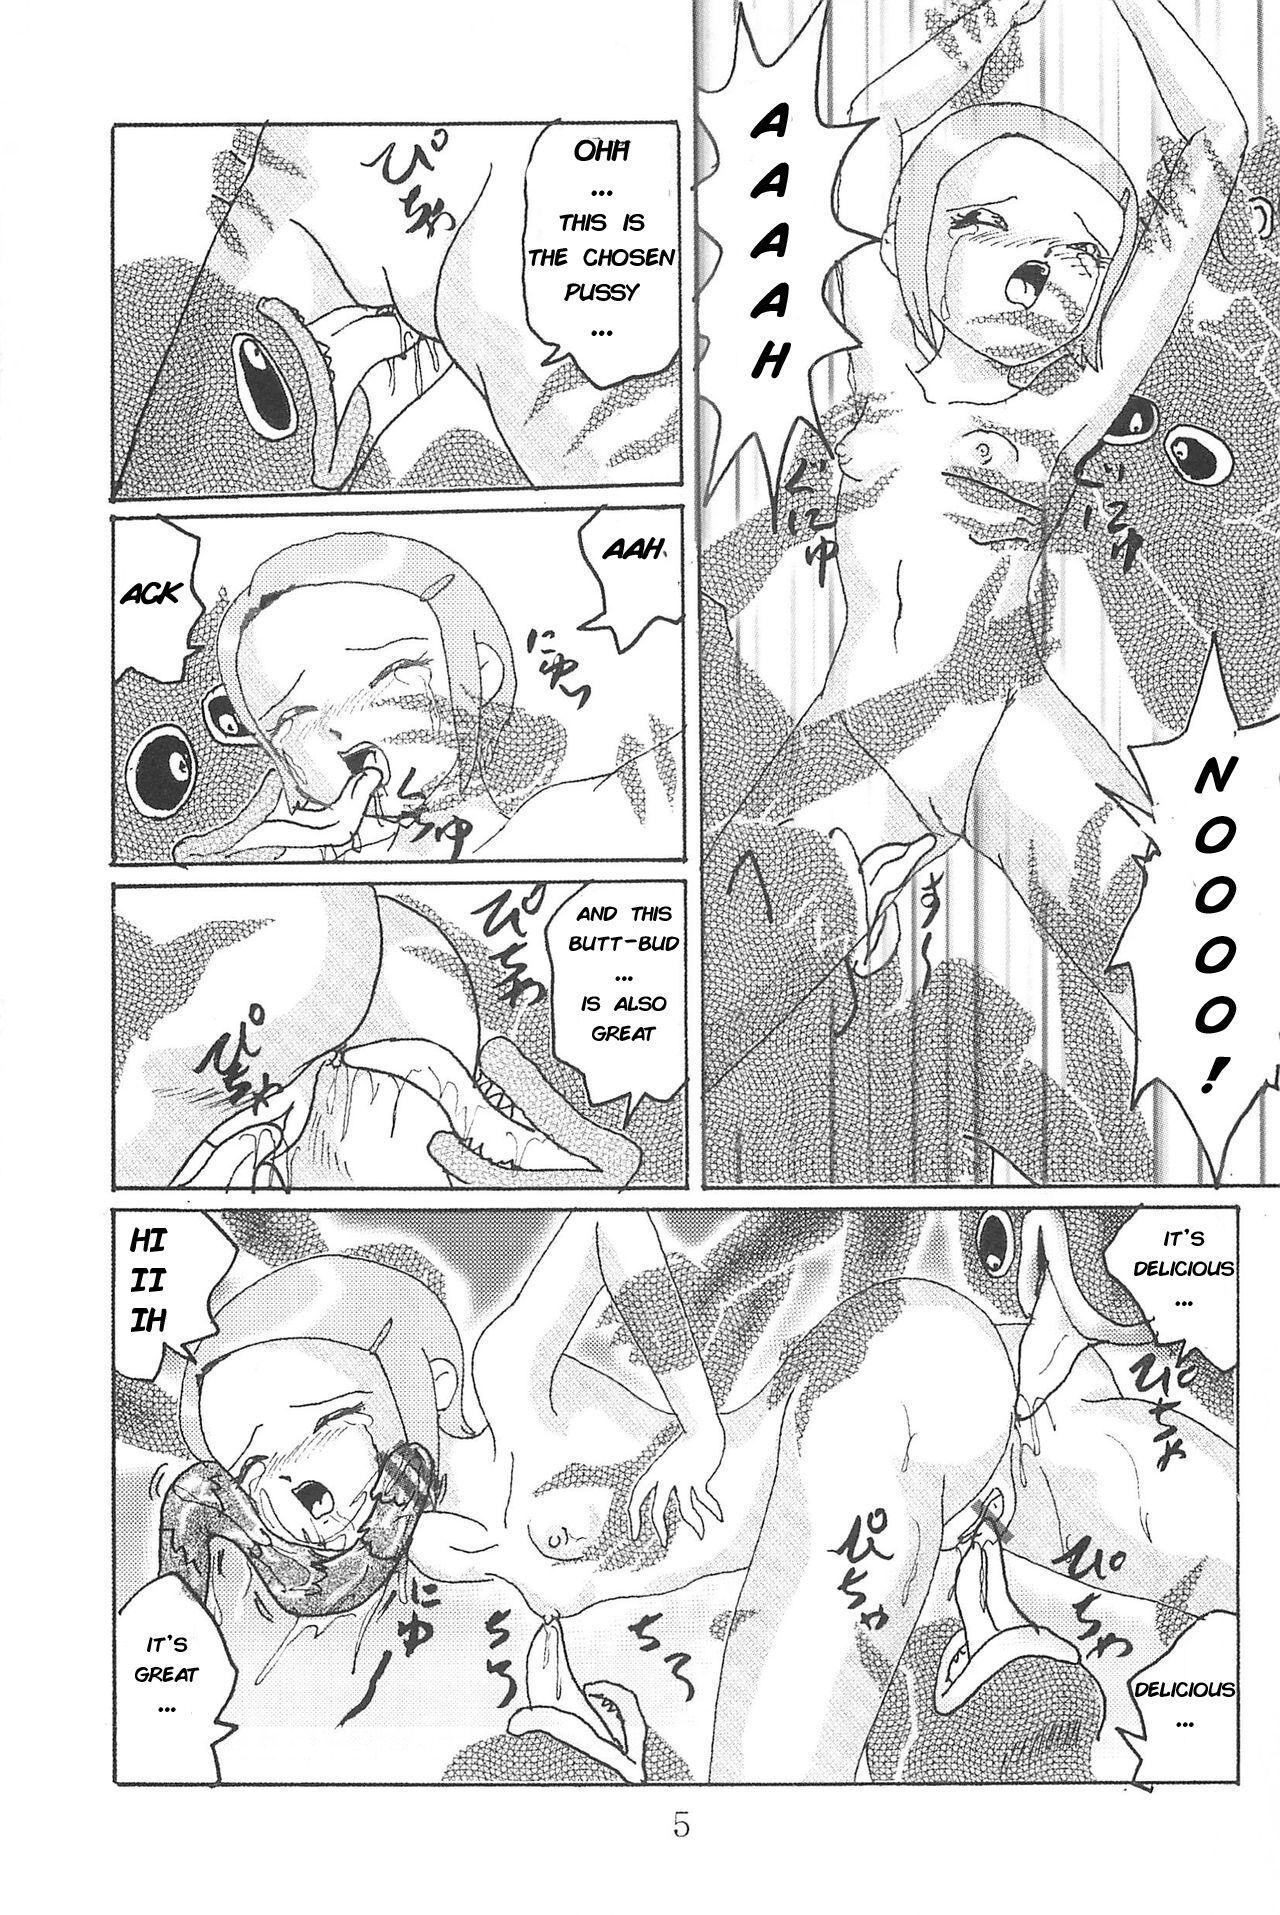 Ethnic Blow Up 8 - Digimon adventure Pussylick - Page 4